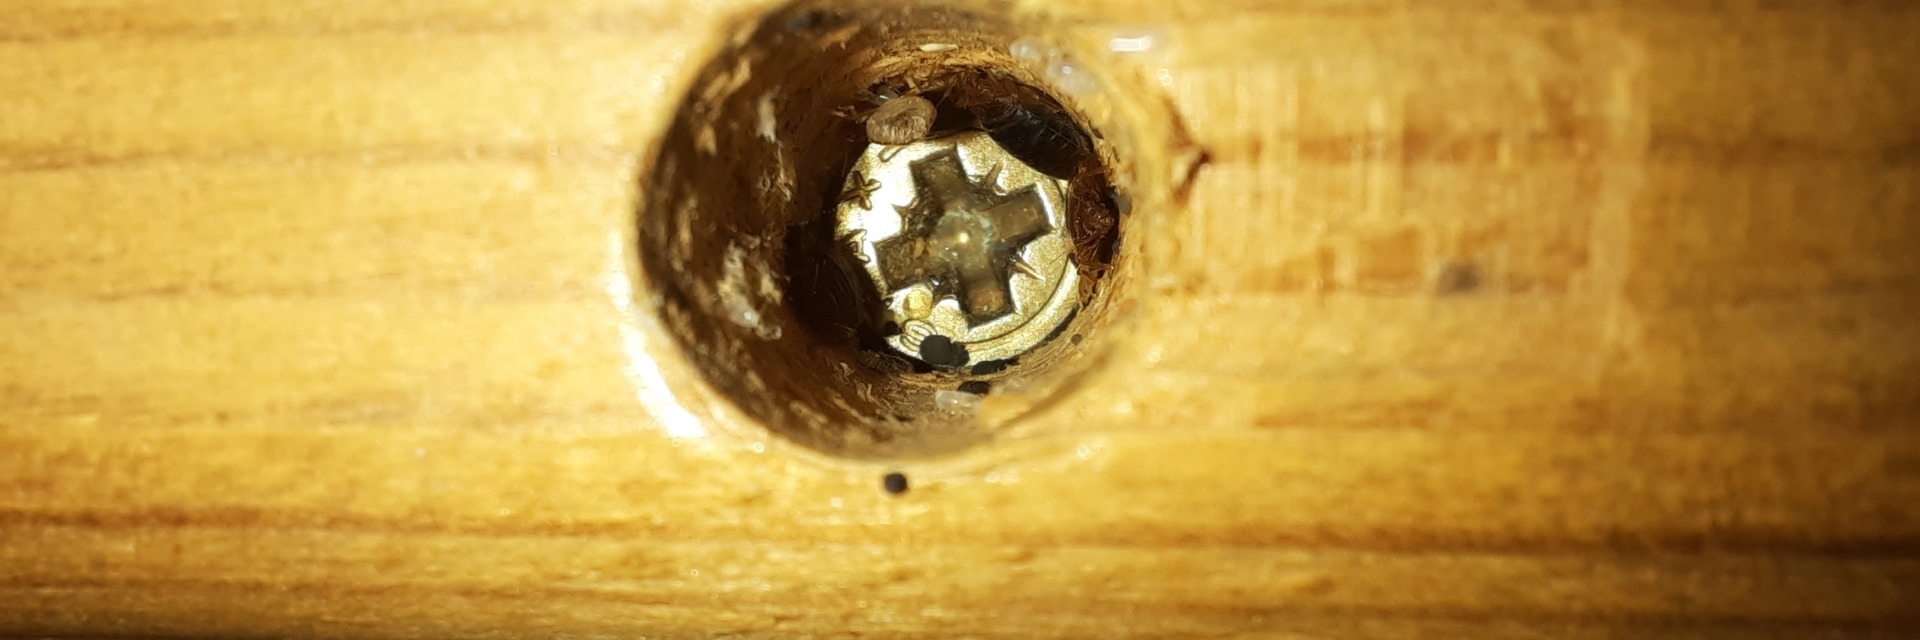 bed bugs in a hole